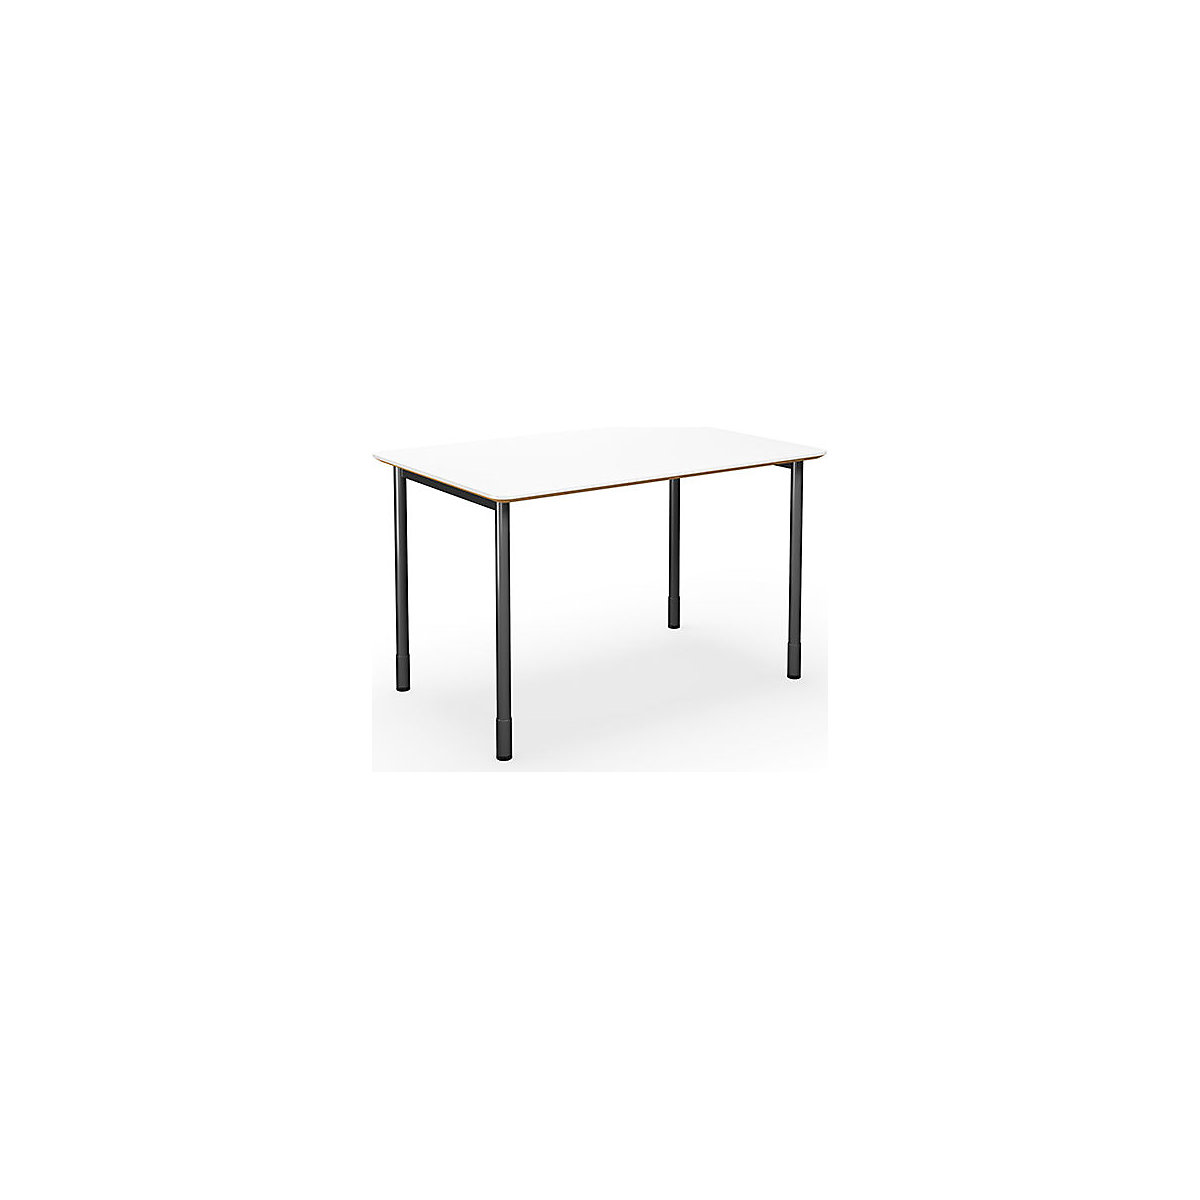 DUO-C Trend multi-purpose desk, straight tabletop, rounded corners, WxD 1200 x 800 mm, white, black-1